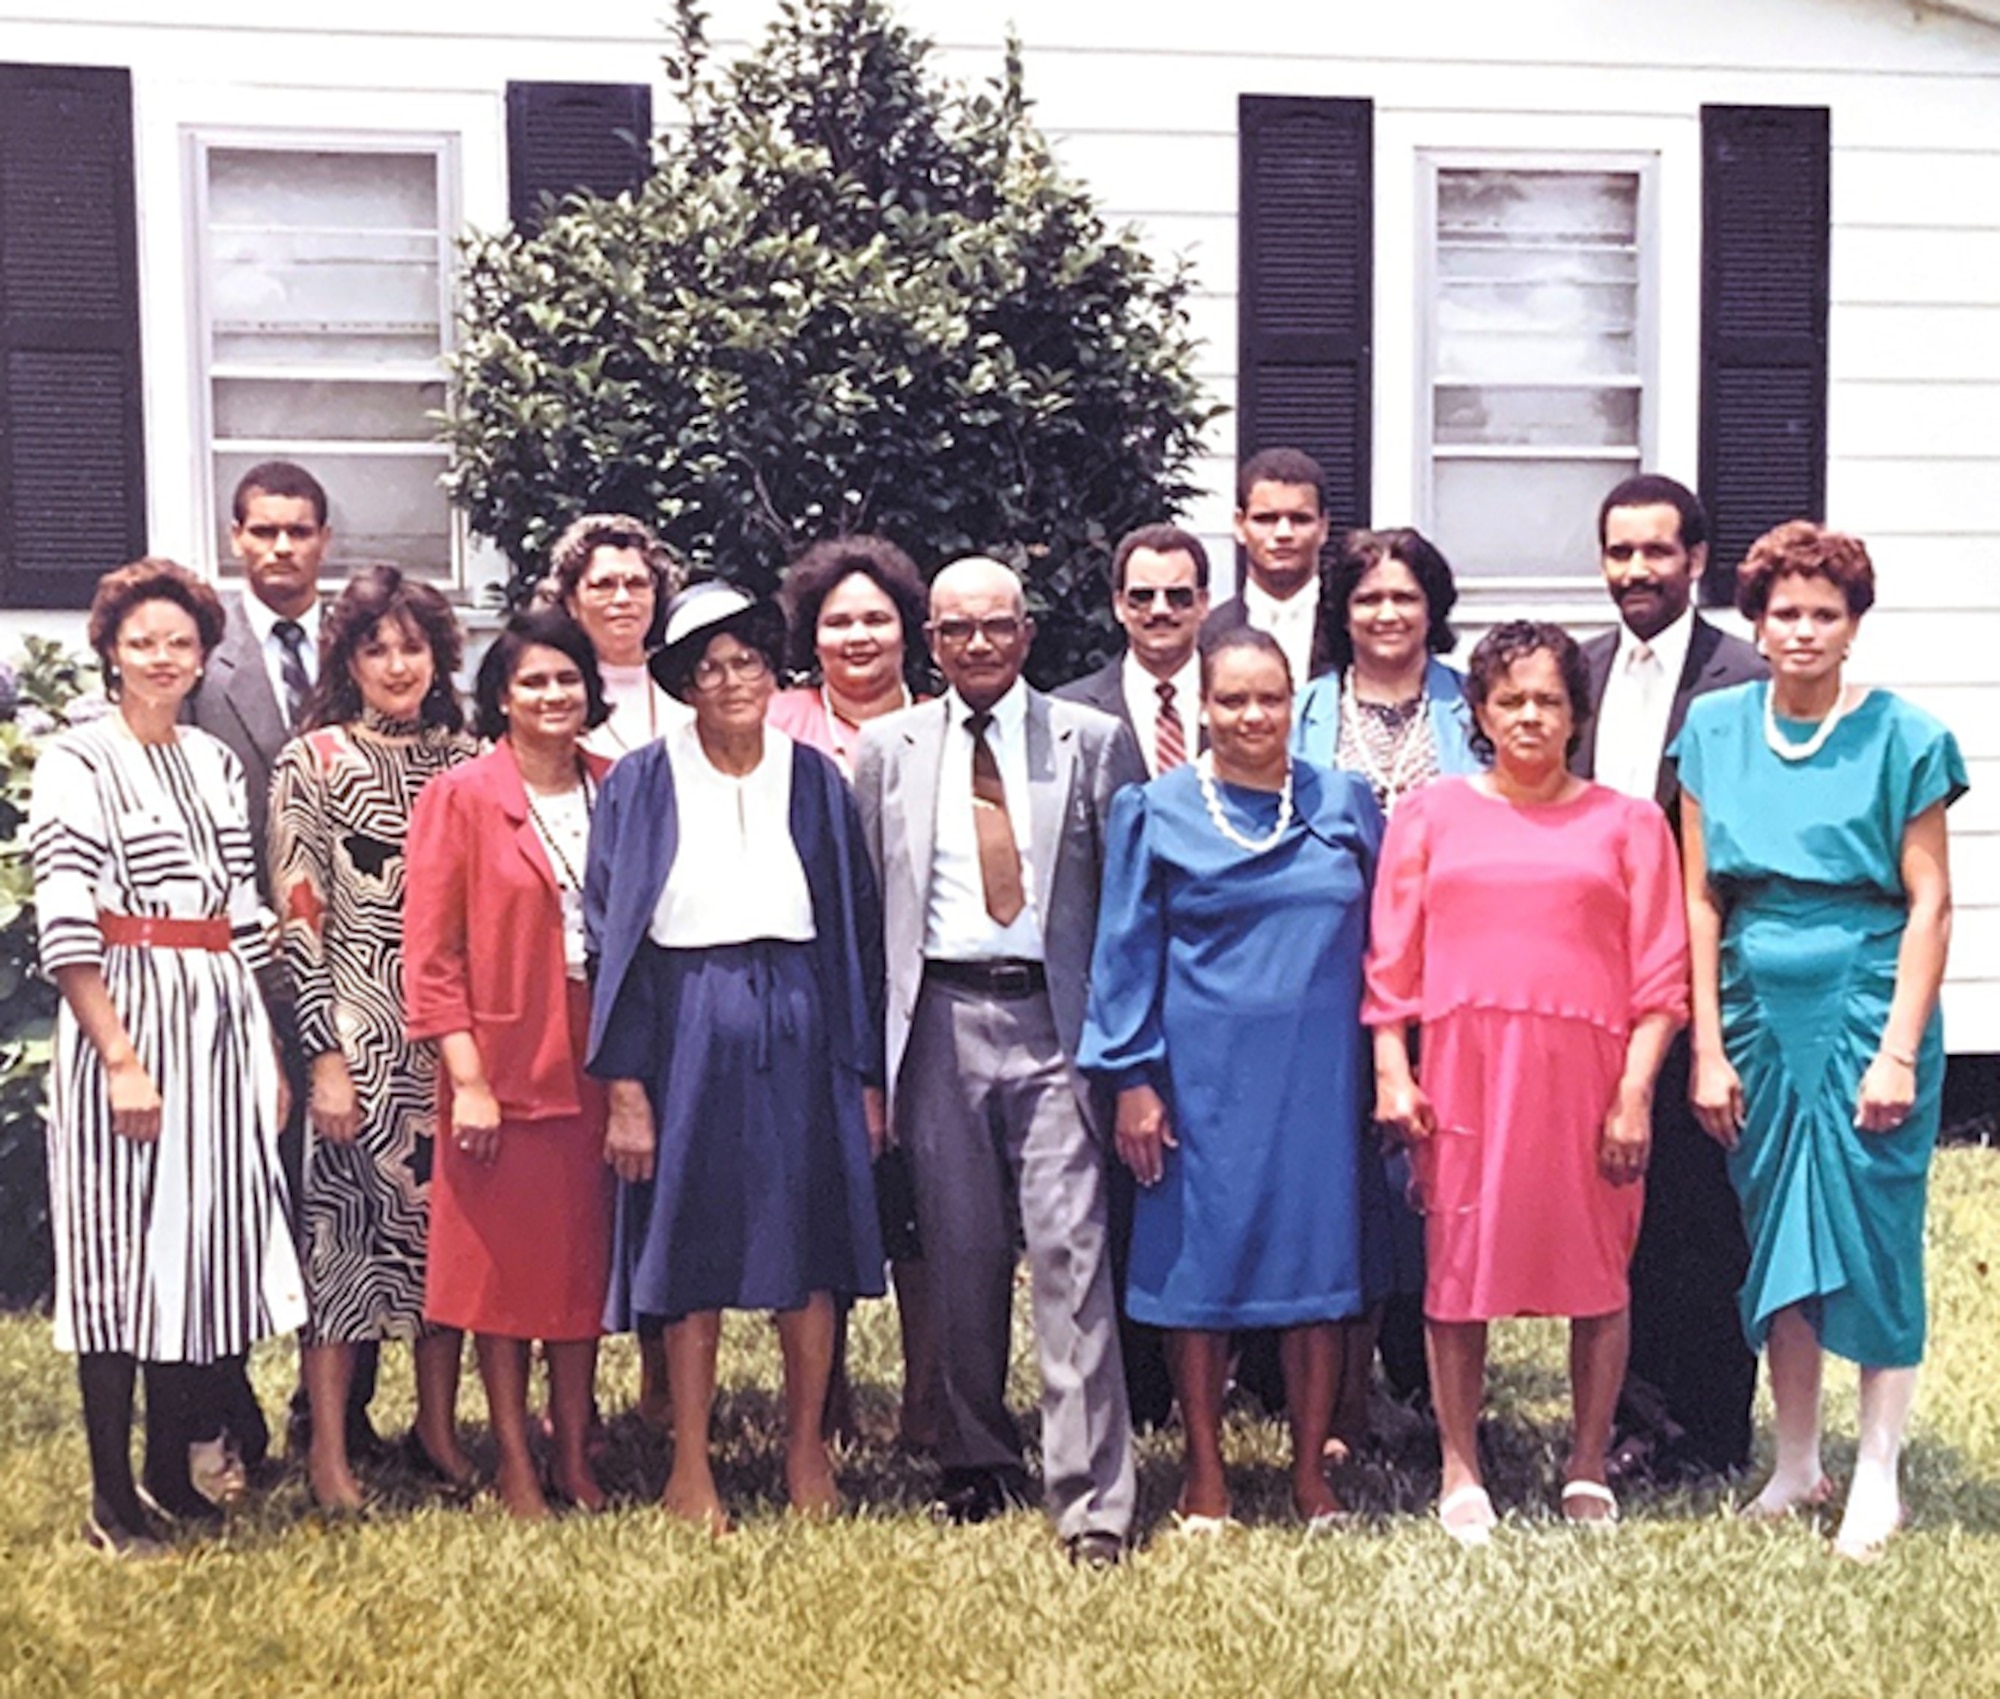 Melvin and Kelvin Bowen take a photo with their family in 1986. The brothers grew up in the small community of East Arcadia, North Carolina, with their 12 other siblings. (Courtesy photo by Kelvin Bowen)